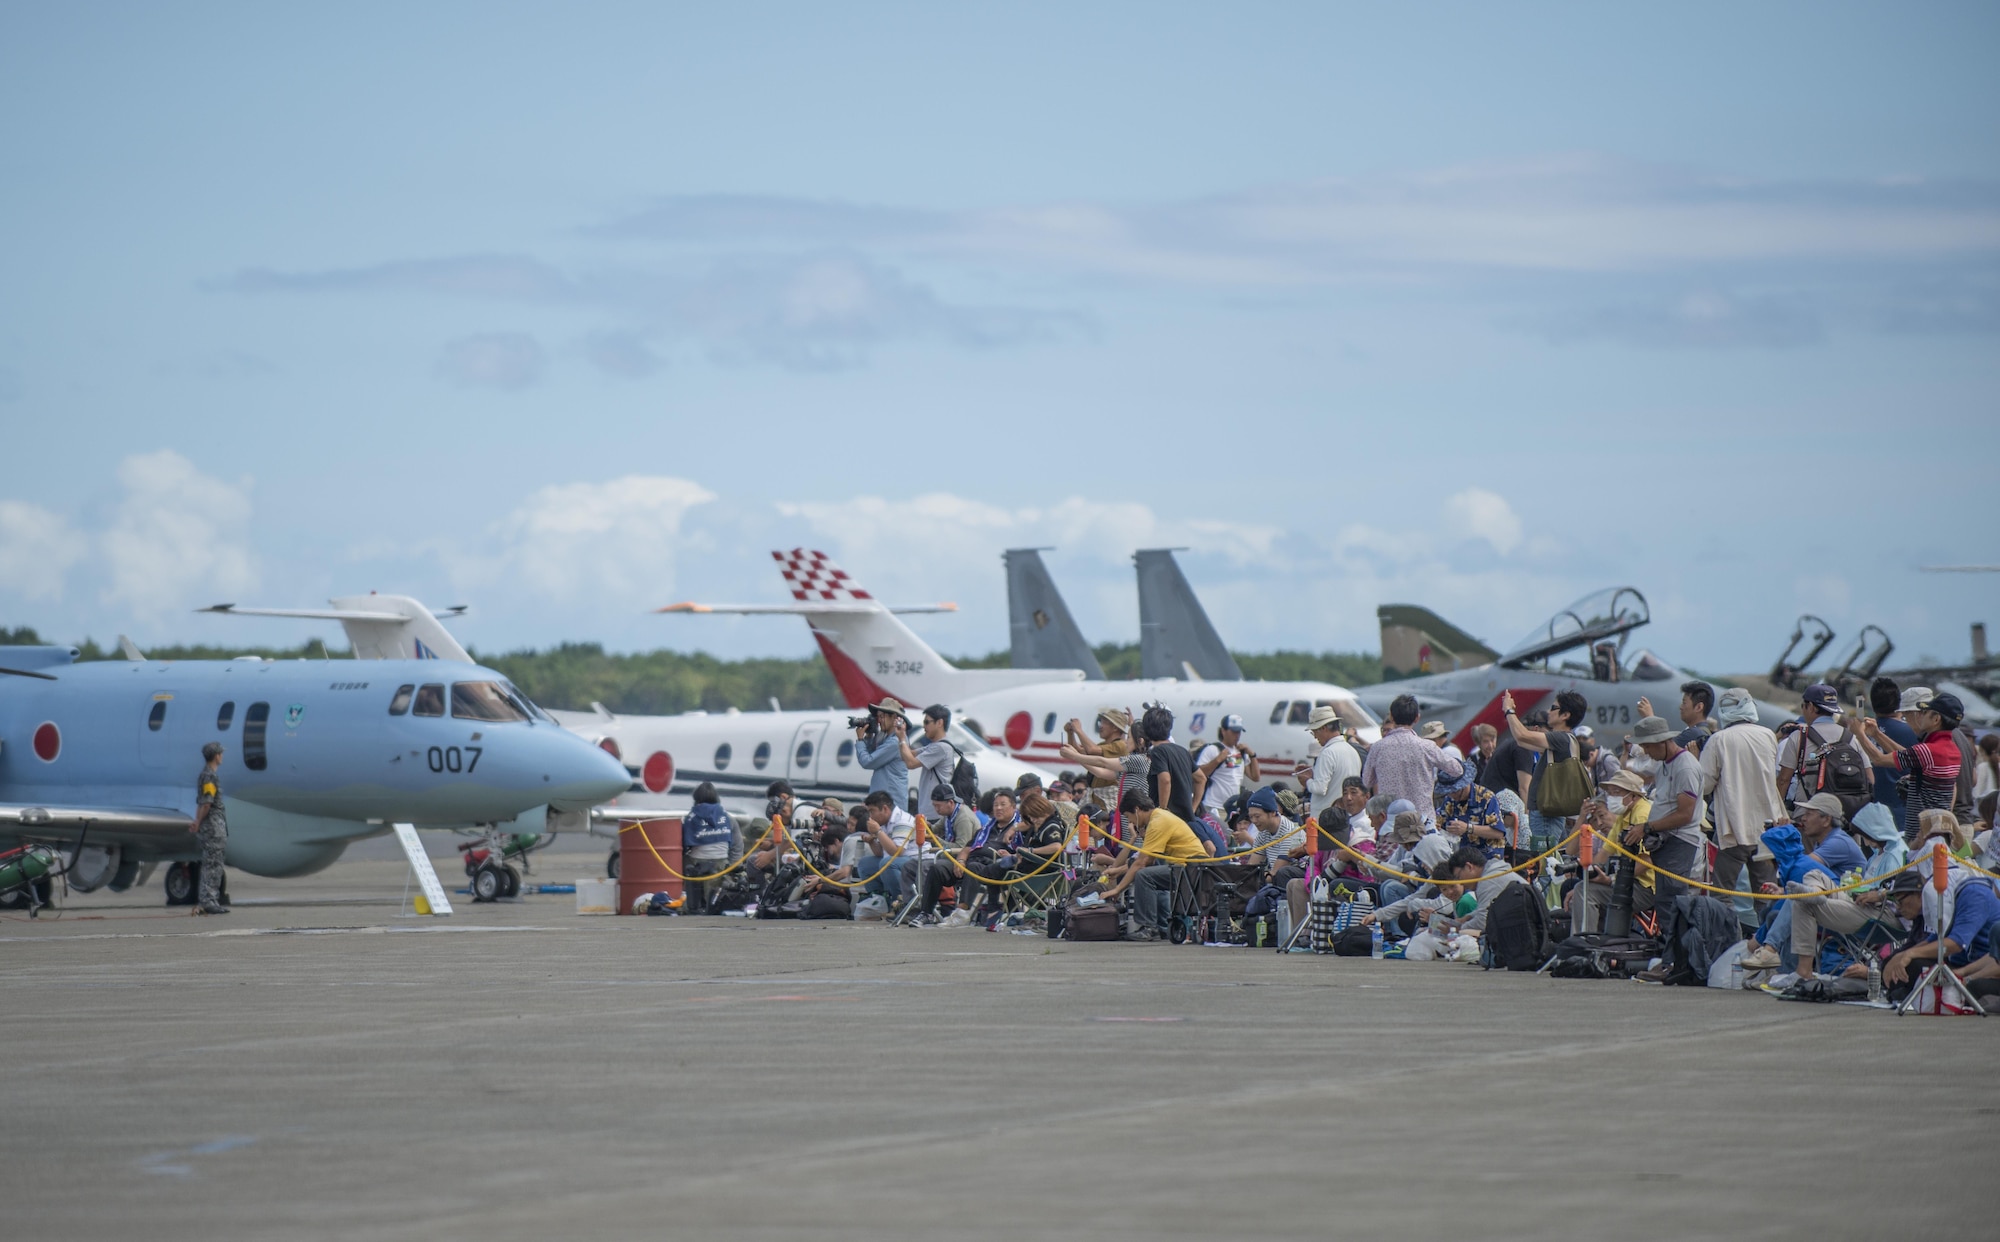 A group of Japanese locals take photos of multiple aircraft during Misawa Air Fest 2016 at Misawa Air Base, Japan, Sept. 11, 2016. More than 80,000 people from across Japan gathered for the air show featuring the Pacific Air Forces' F-16 demonstation team, the Japan Air Self-Defence Force aerial demonstration team Blue Impulse, and multiple other aircraft. (U.S. Air Force photo by Senior Airman Brittany A. Chase)